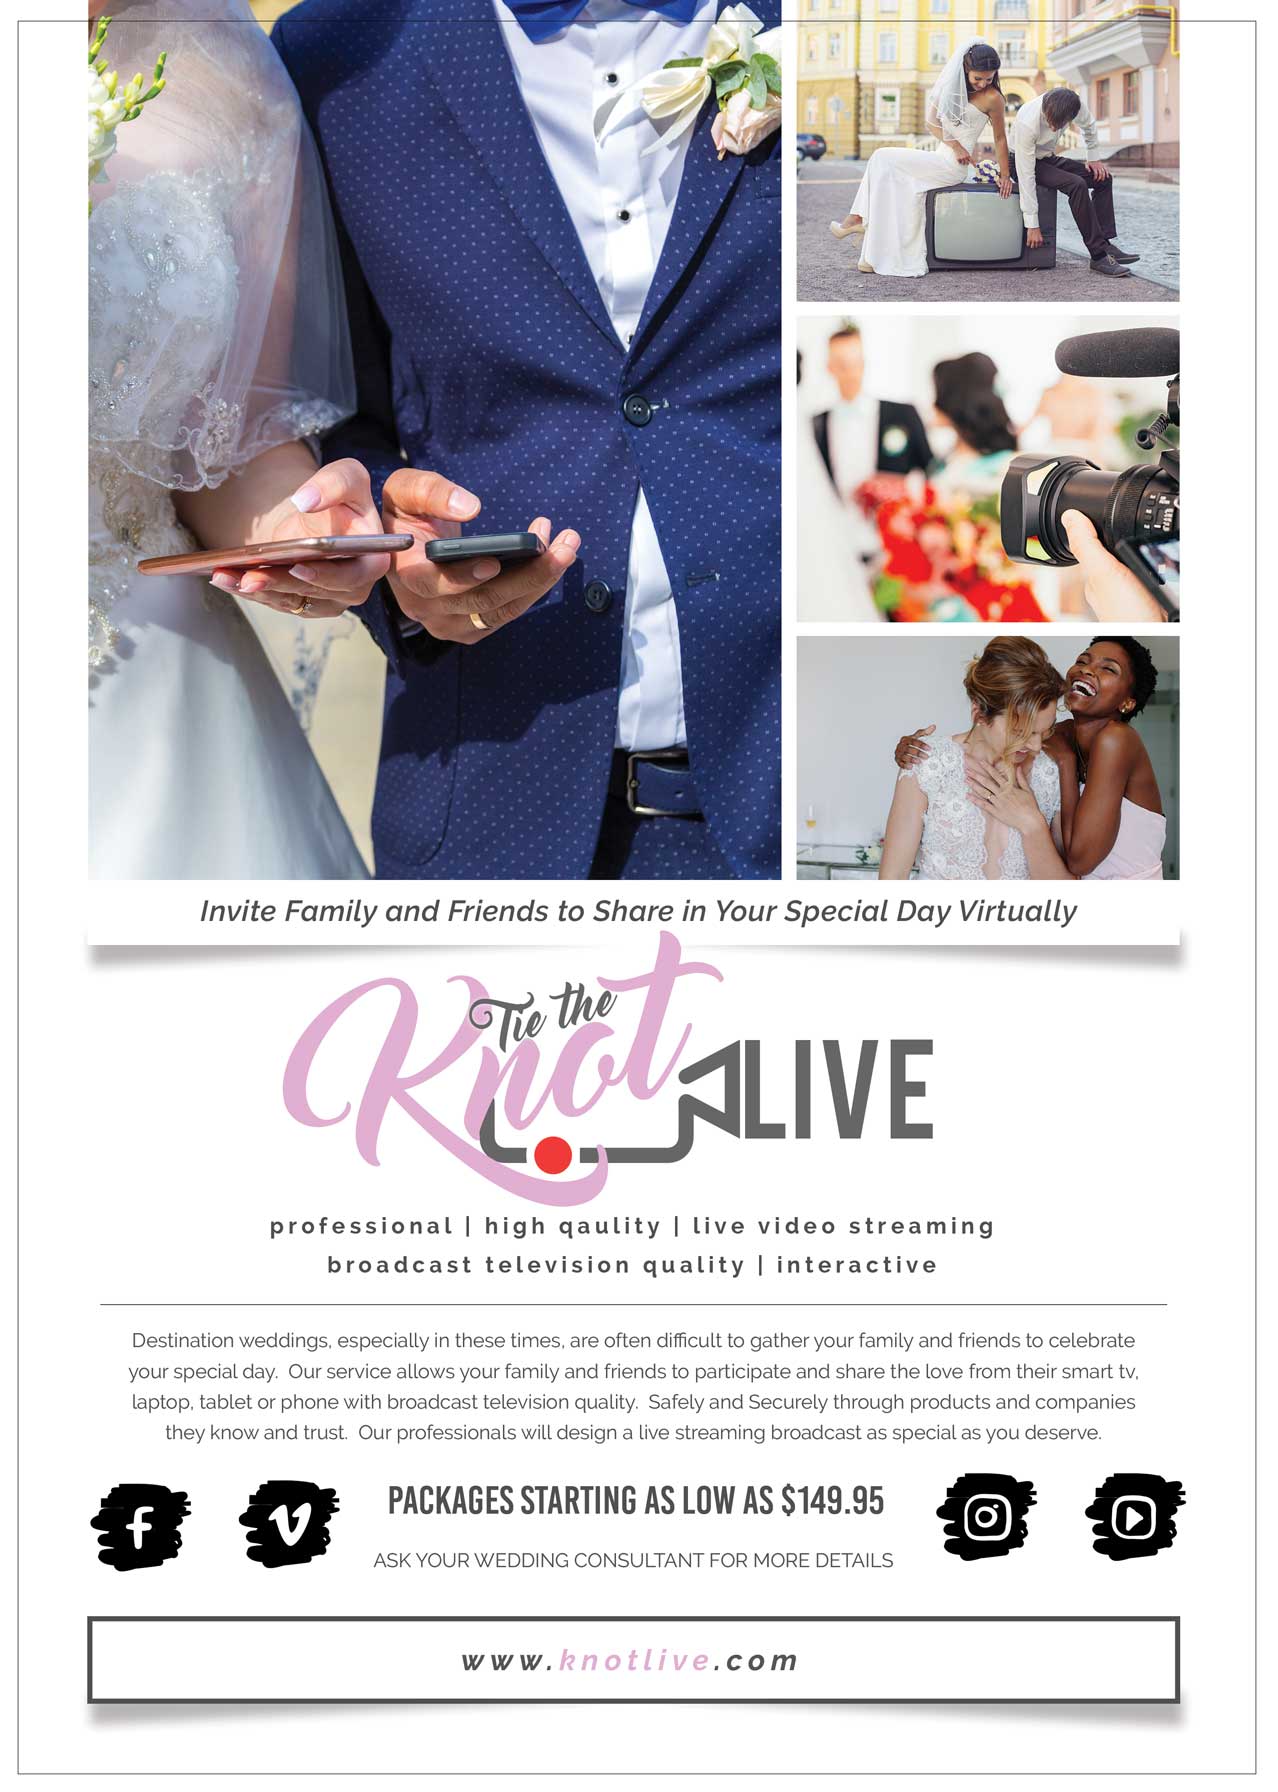 Knot Live Professionally Live Stream your Wedding Ceremony on Facebook, YouTube, Vimeo, and Instagram